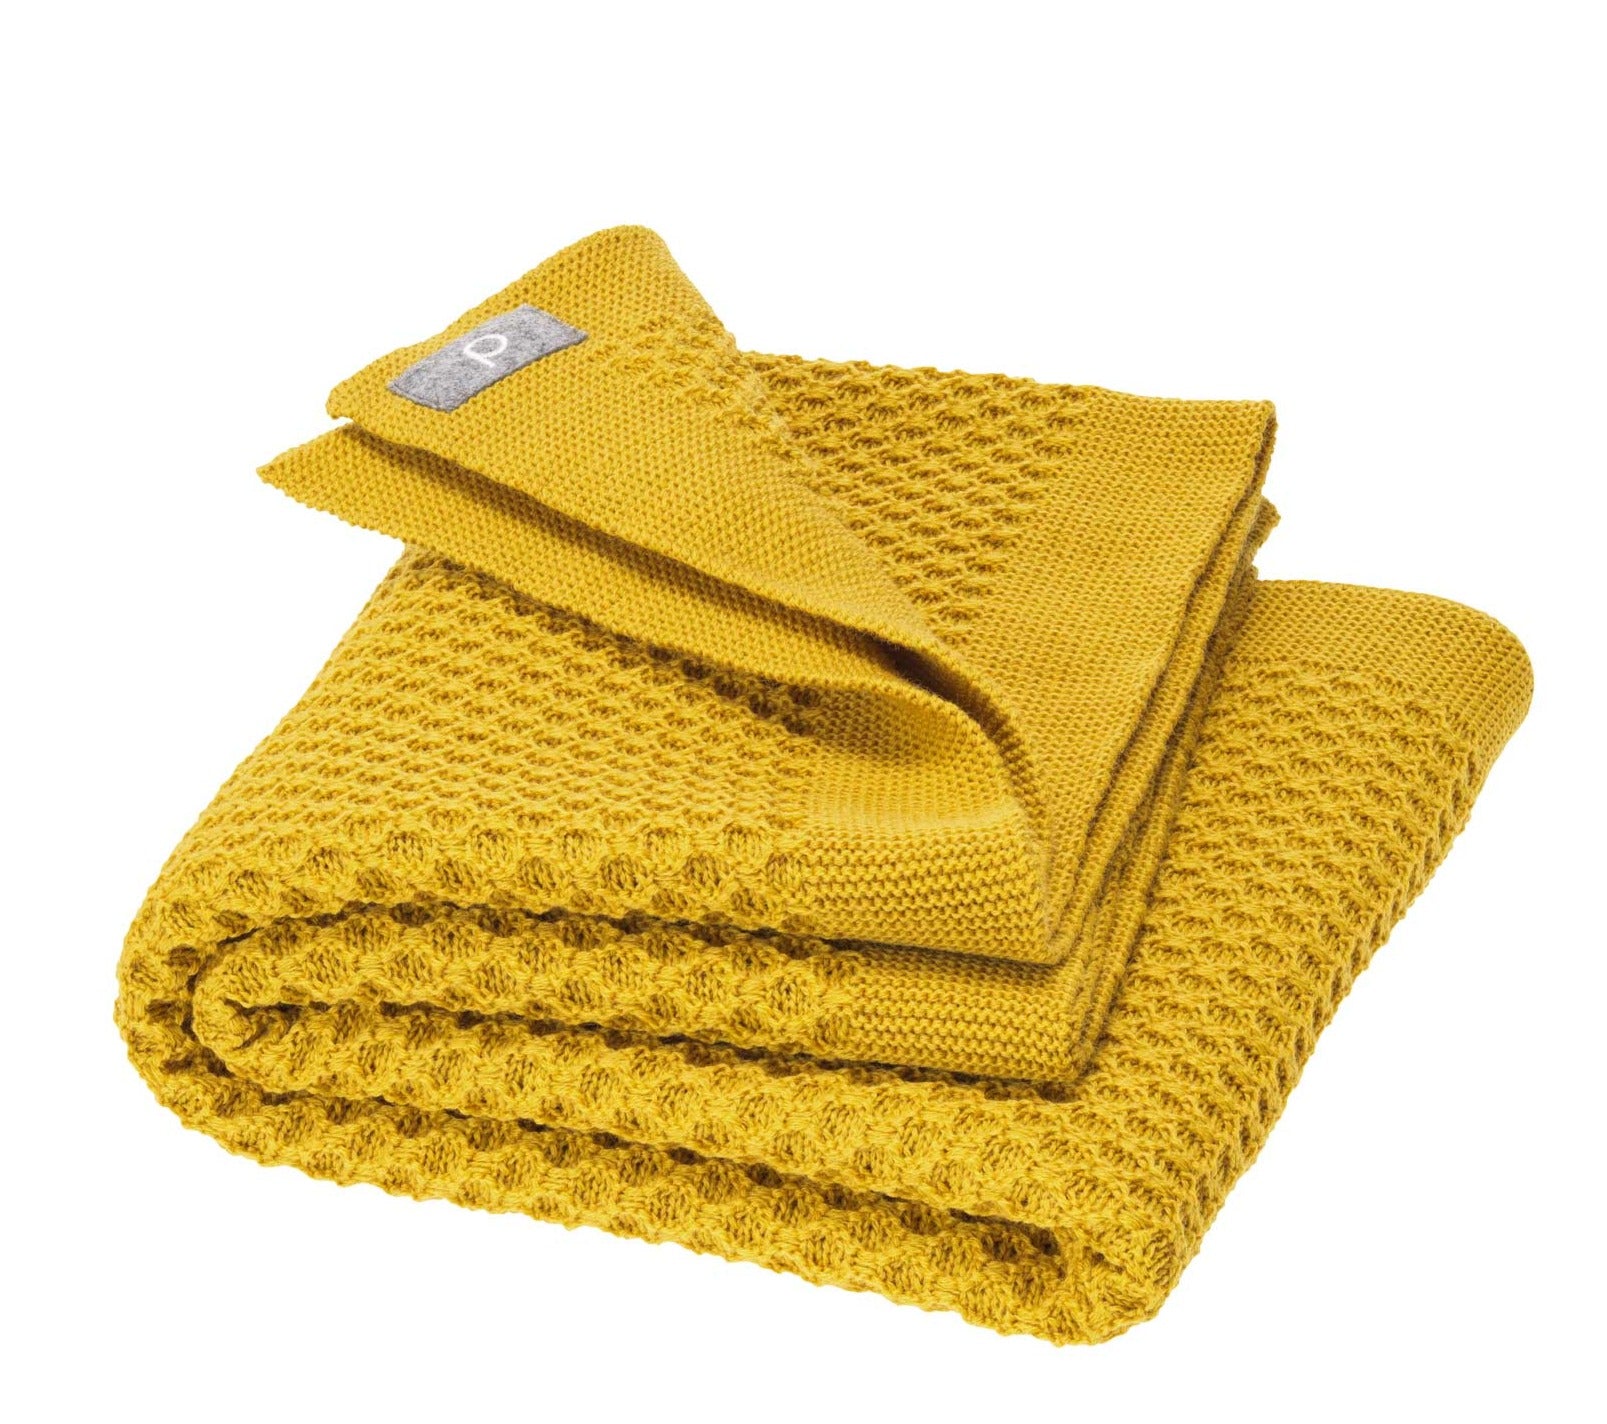 Disana&#39;s honeycomb blanket in curry. Made of 100% soft merino wool.